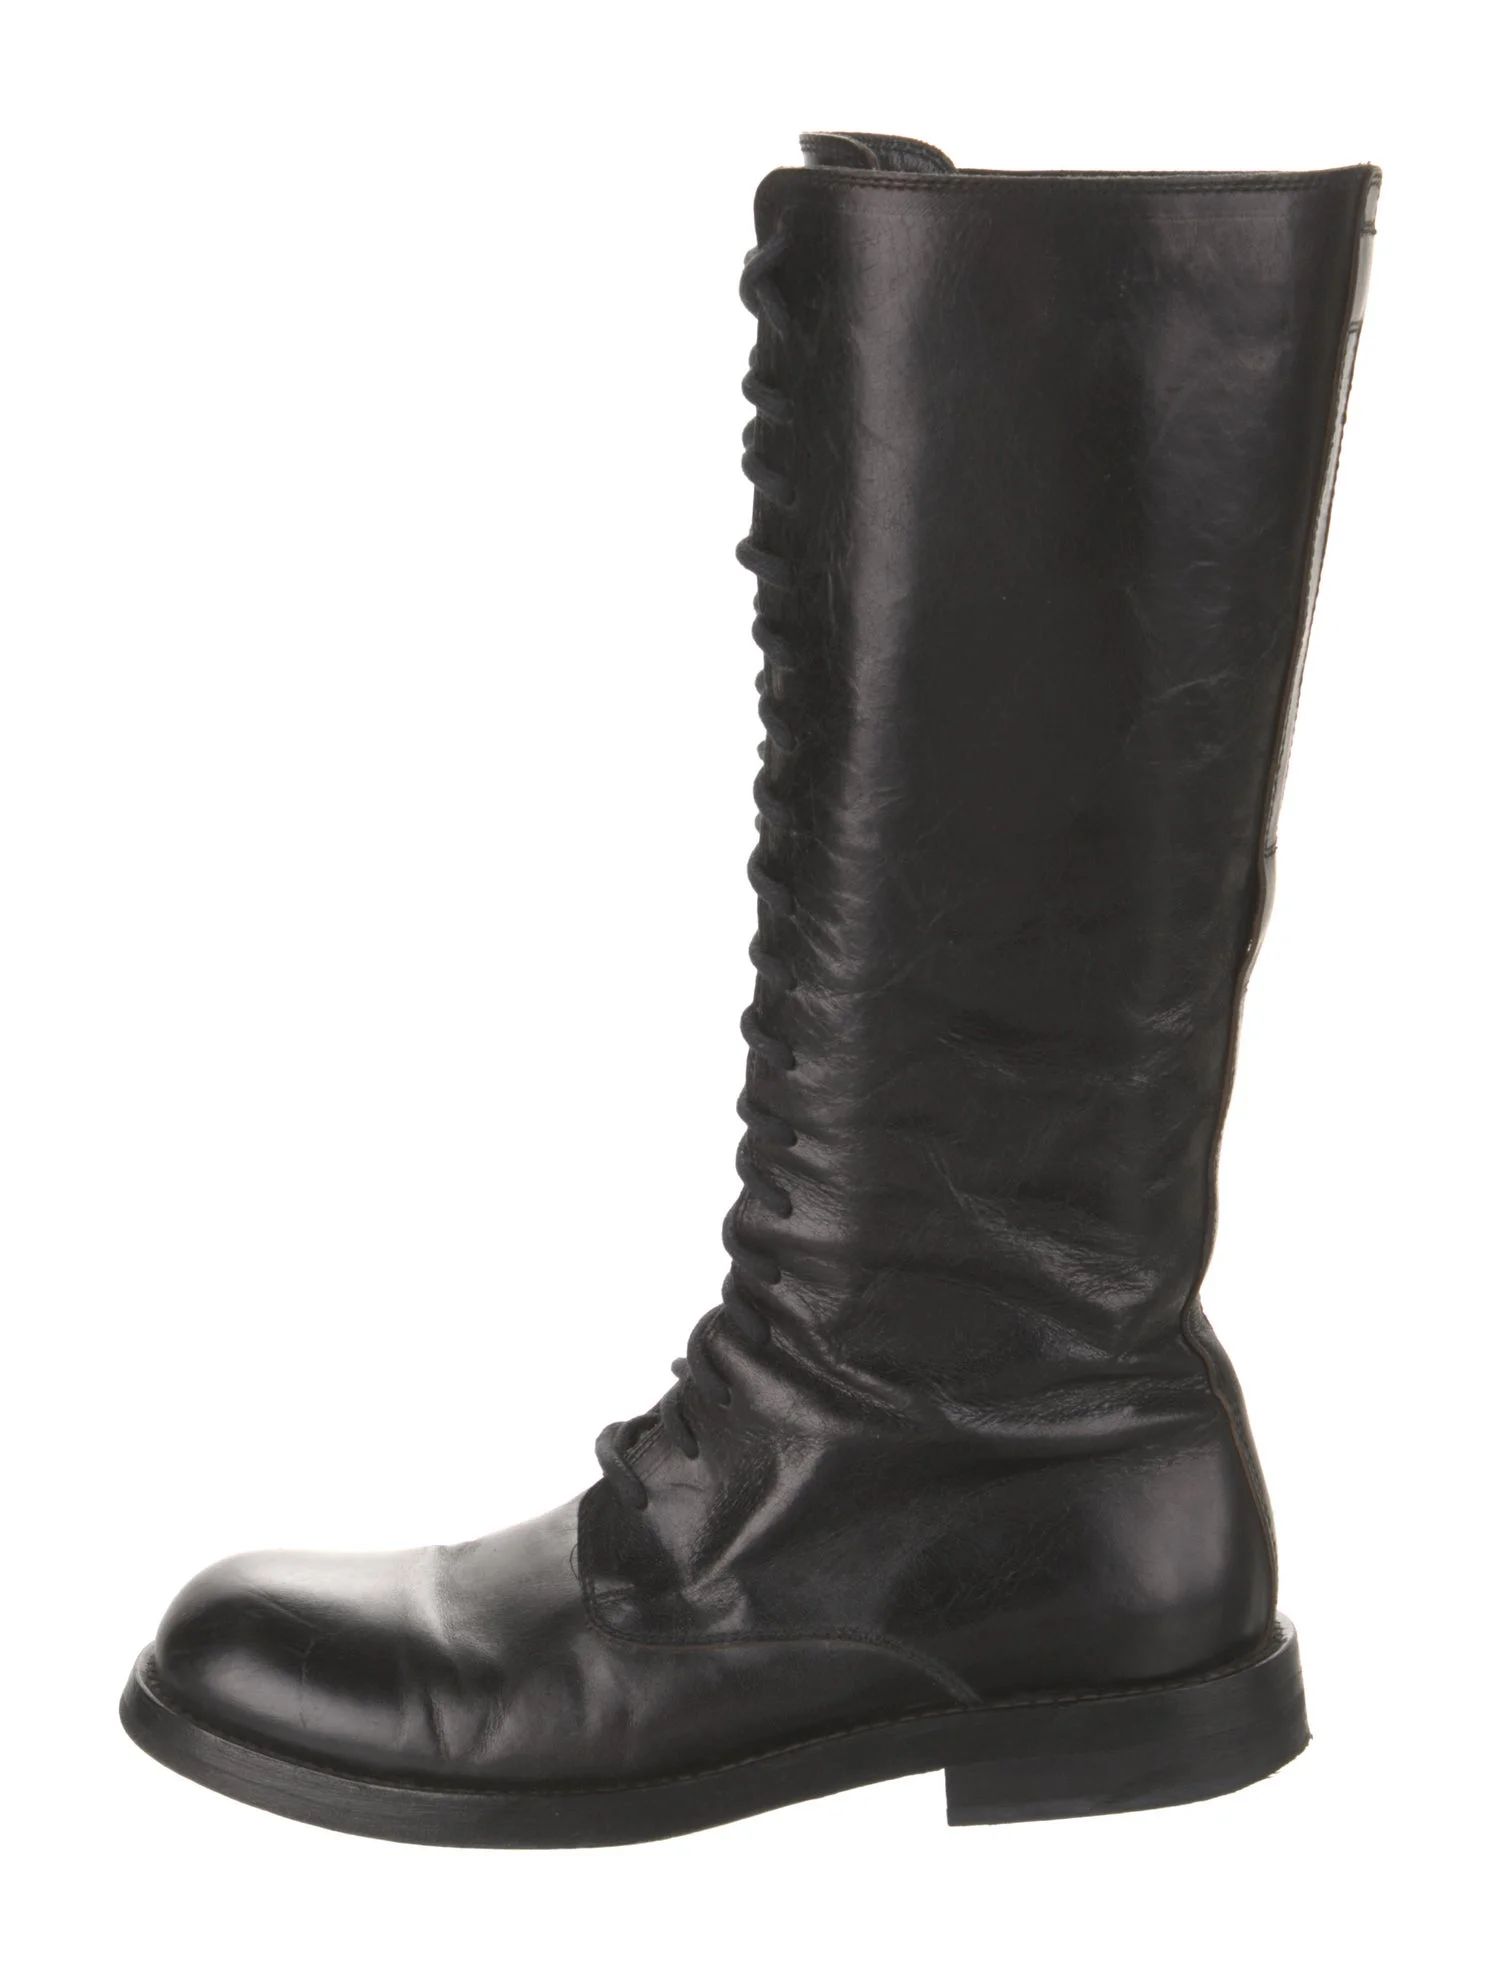 Ann Demeulemeester Leather Knee-High Lace-Up Boots | The RealReal